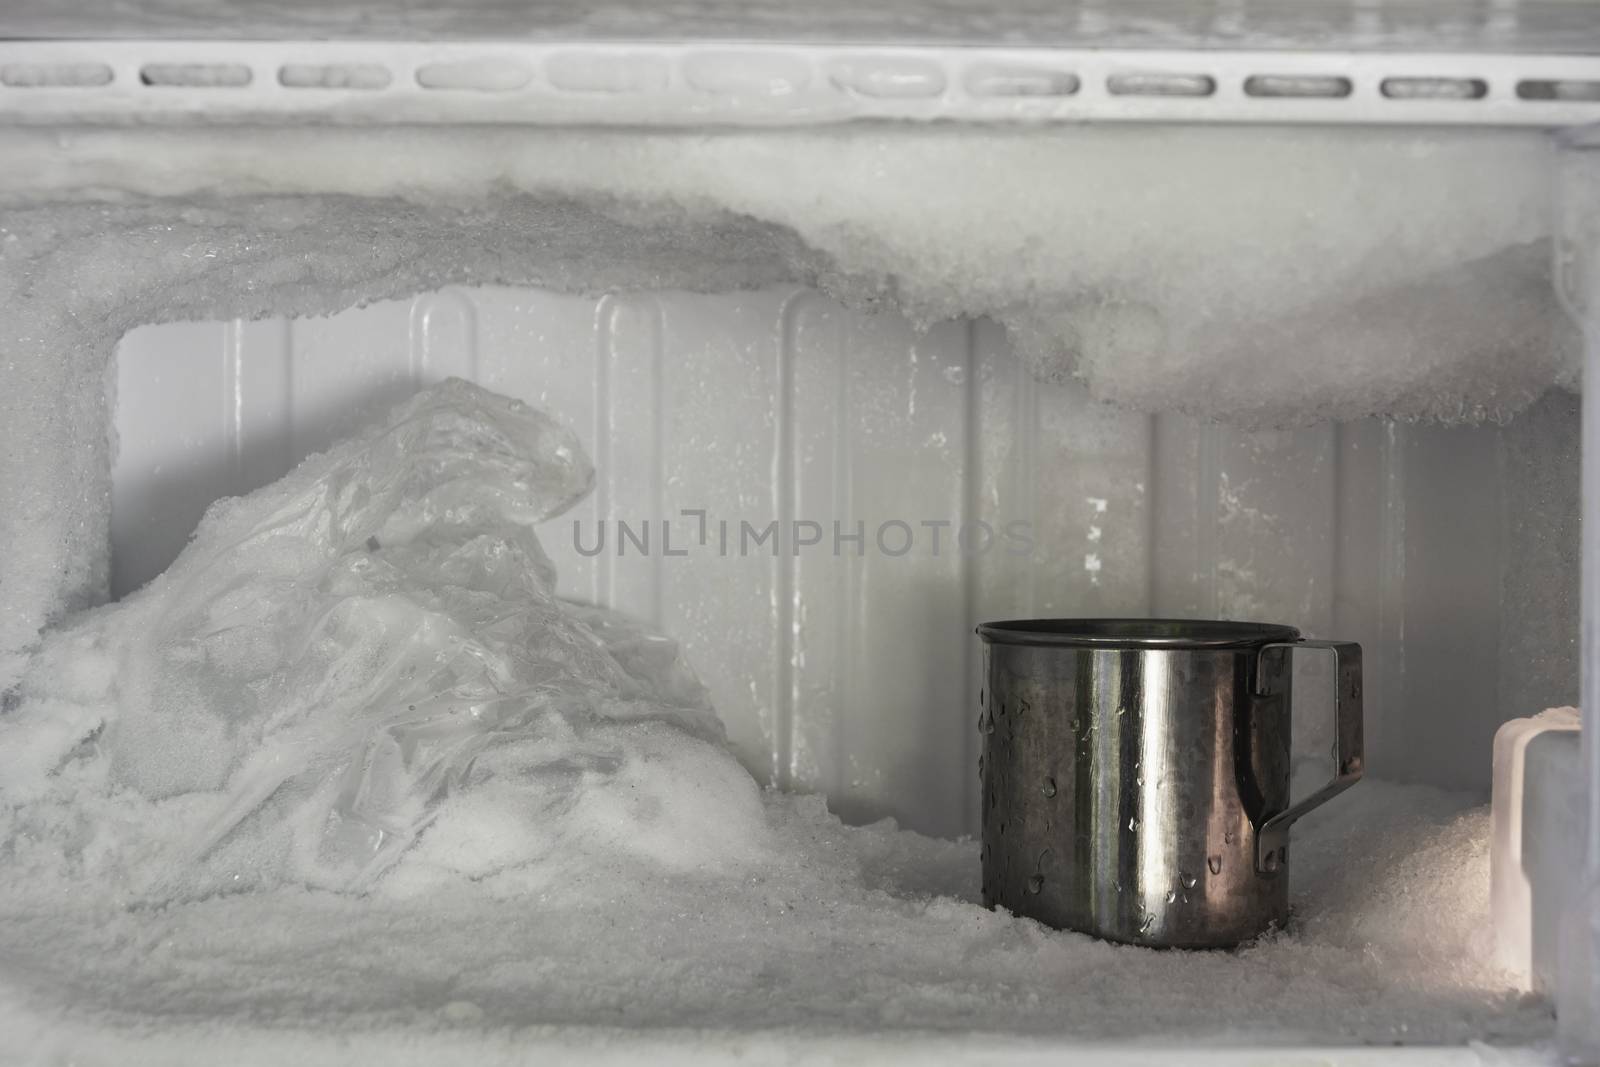 Stainless steel drinking water glass in freezer of a refrigerato by kirisa99